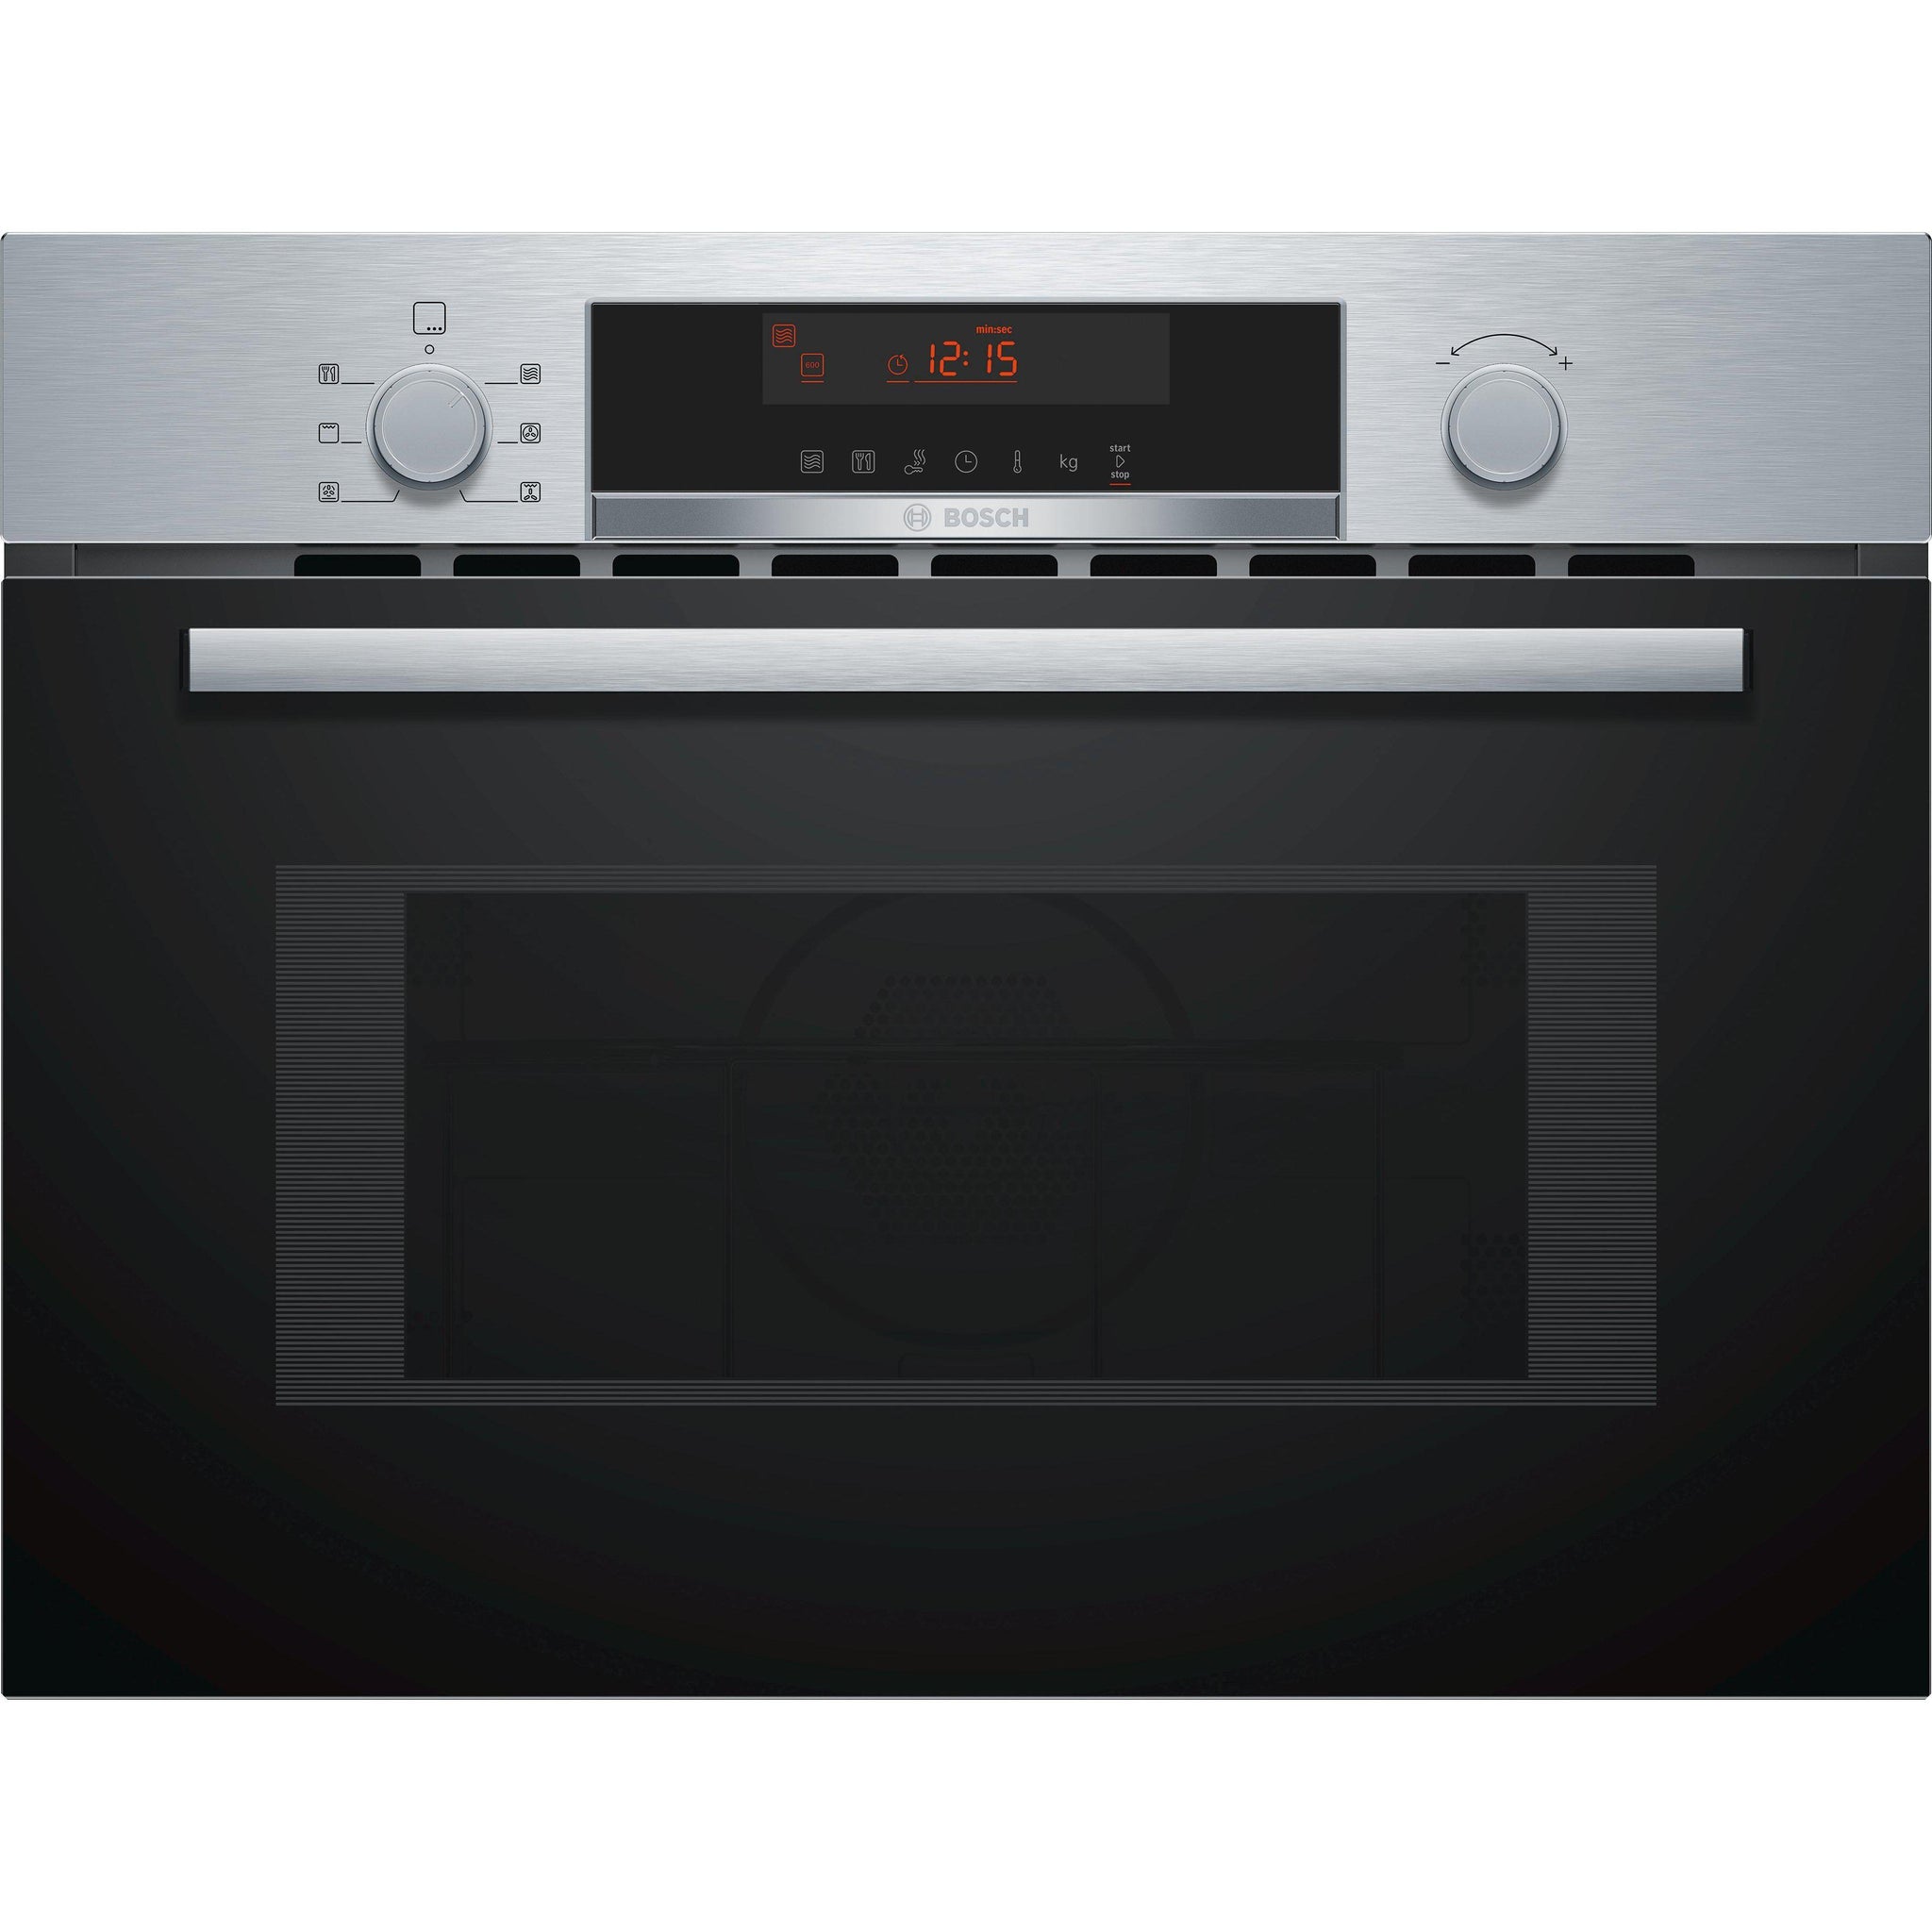 Bosch Cma583ms0b Series 4 Combination Microwave Oven Brushed Steel Delivery Within 57 Days